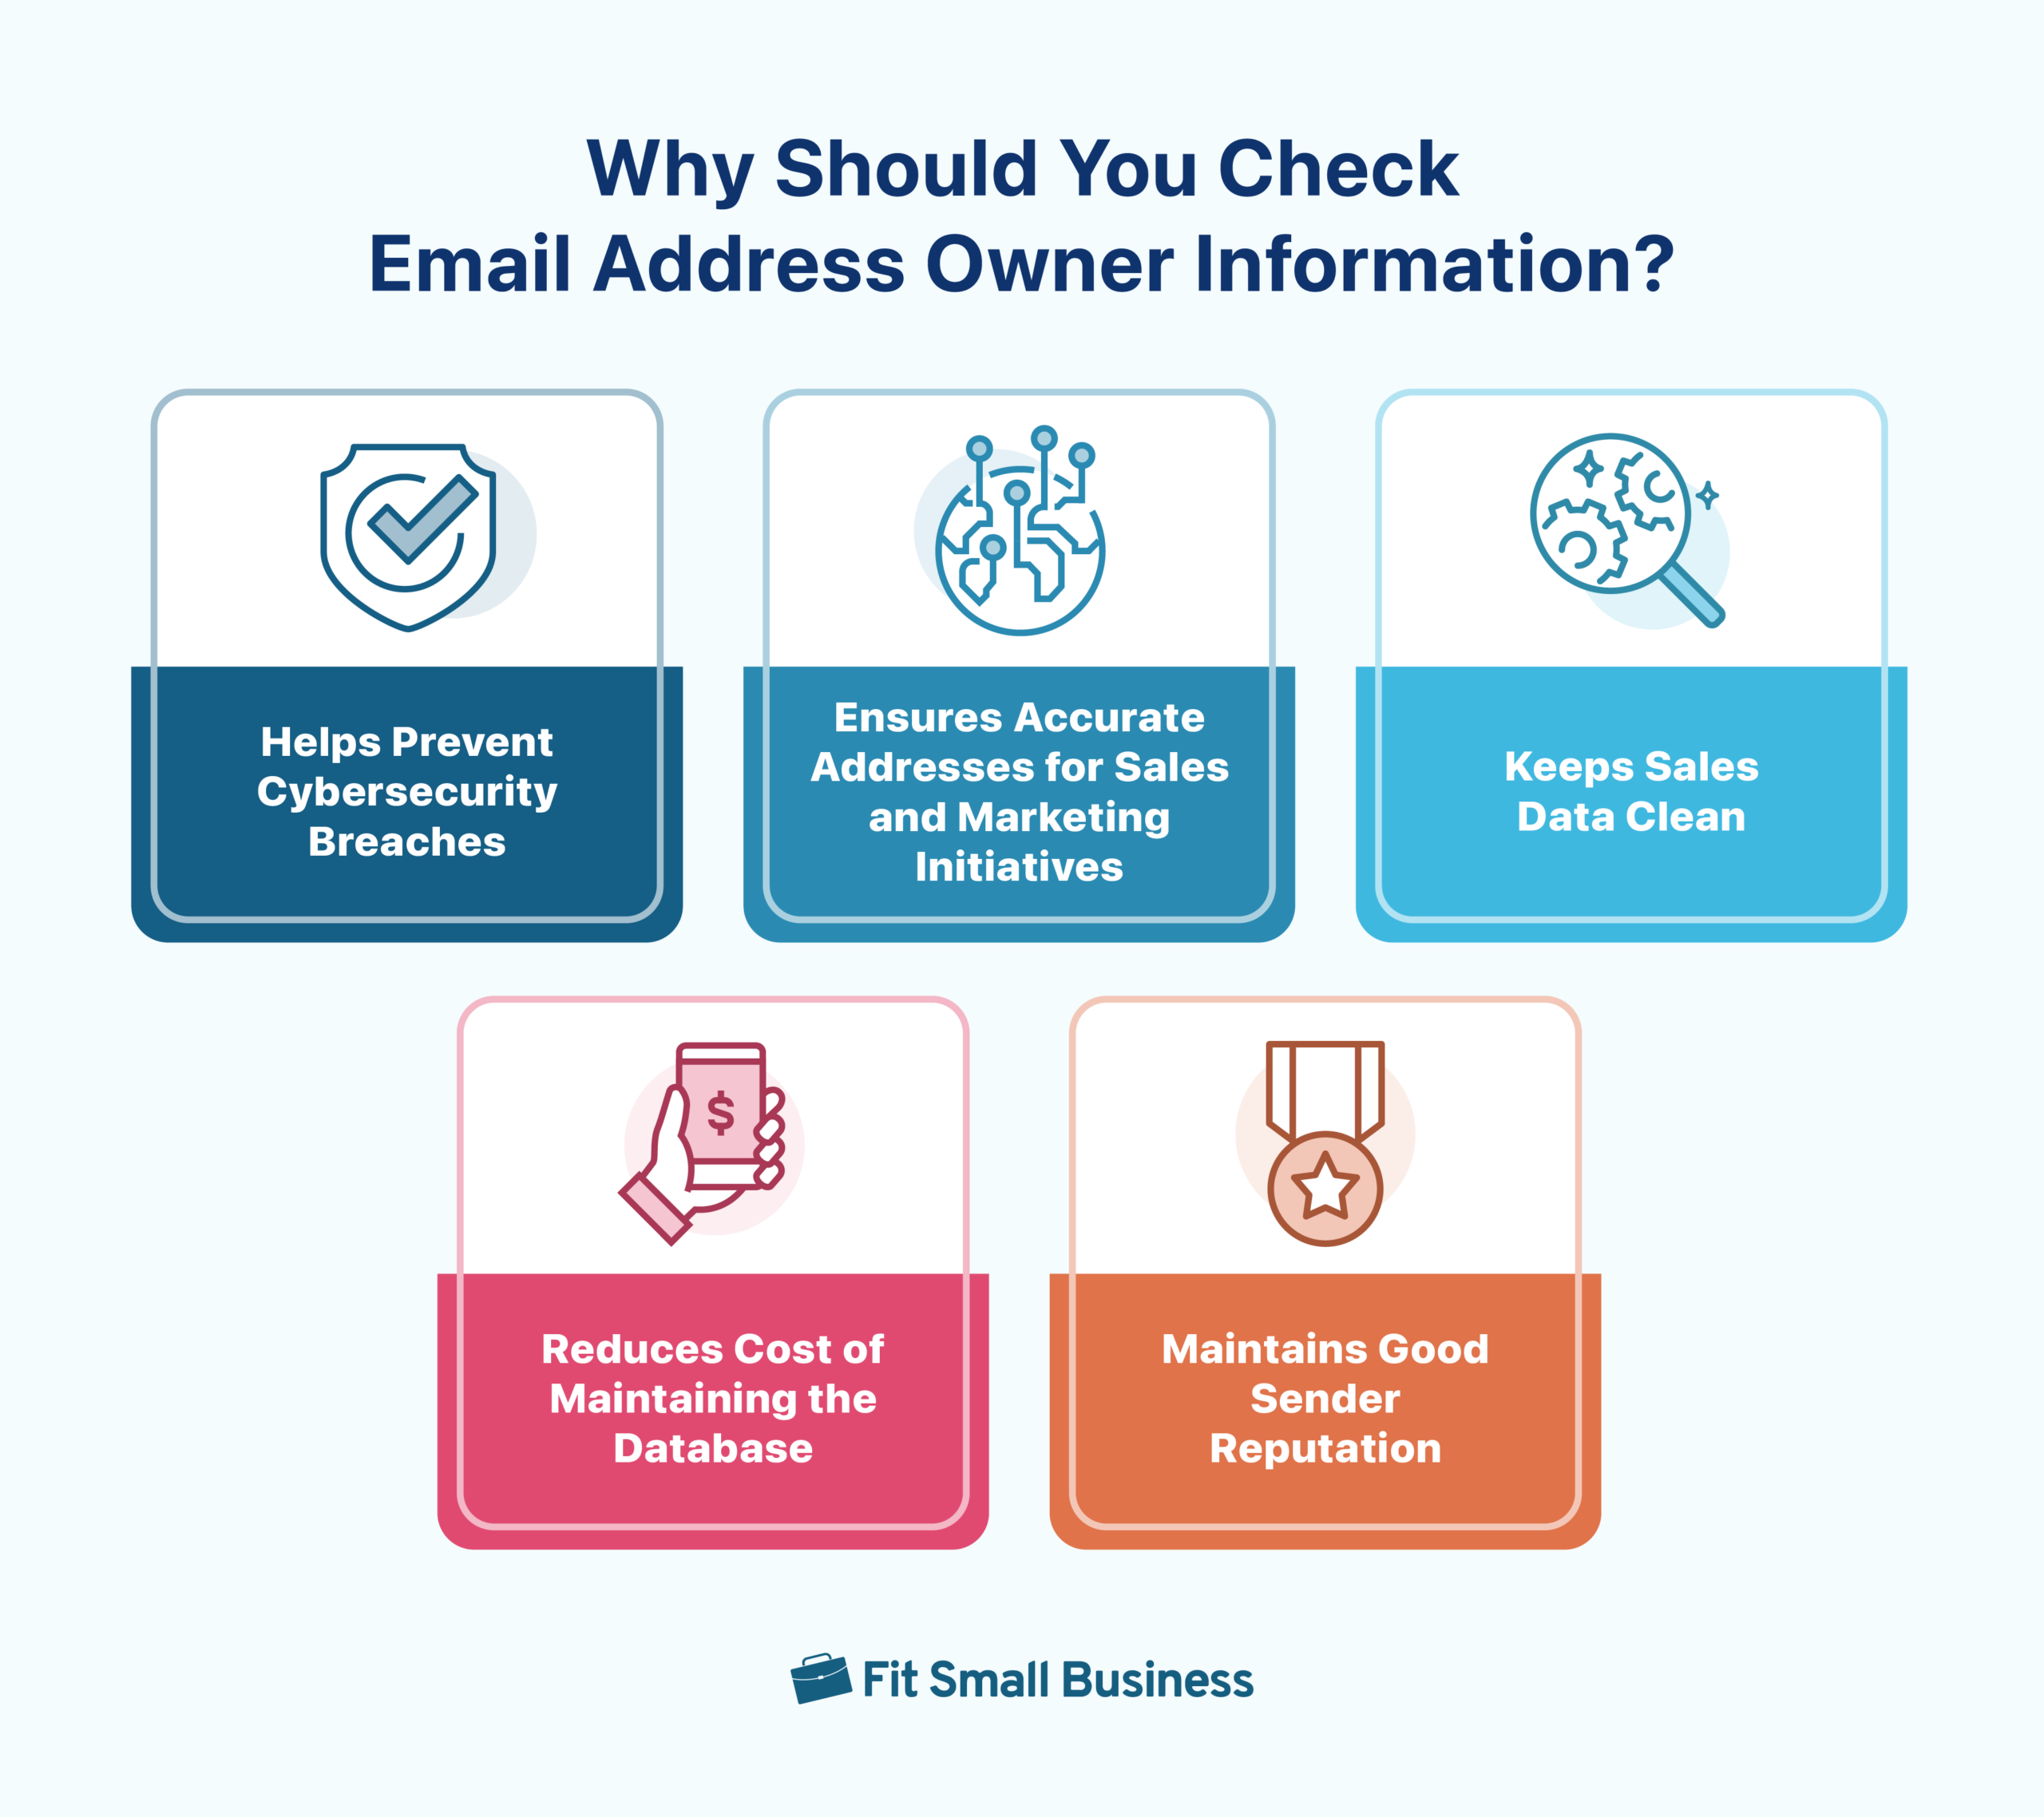 A diagram showing the main benefits of checking email address owners.